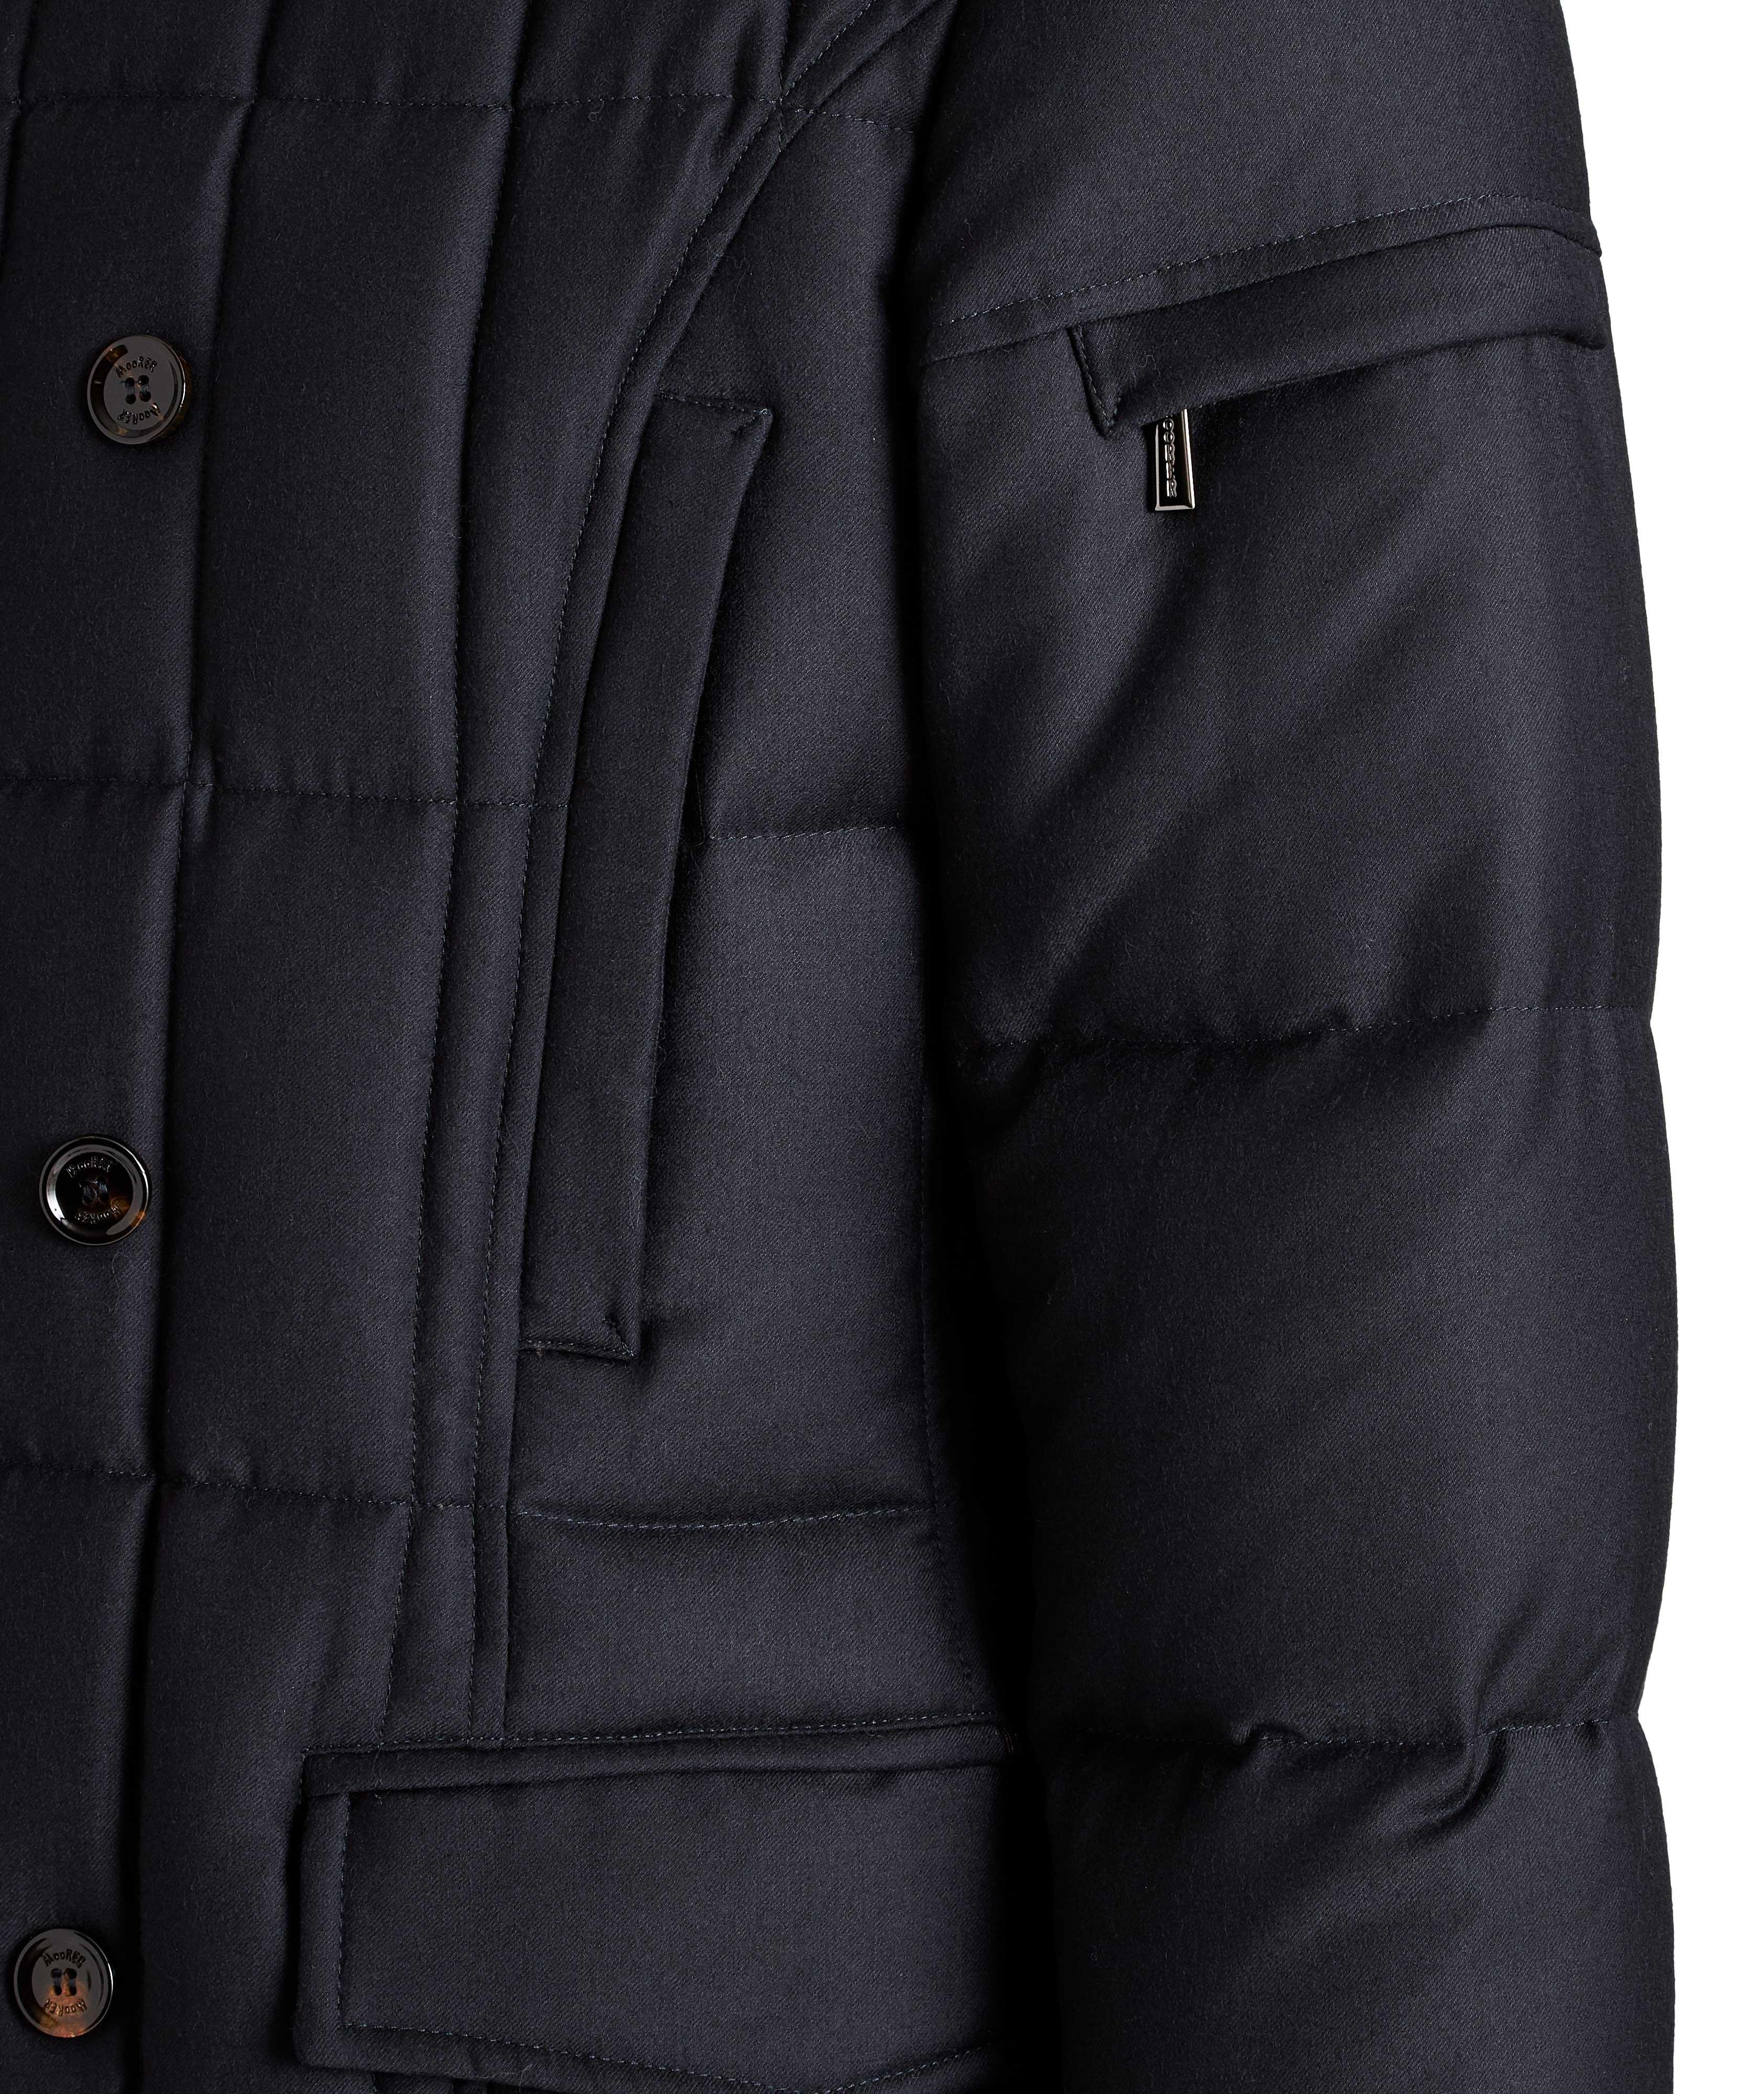 Siro Quilted Wool-Cashmere Jacket image 3